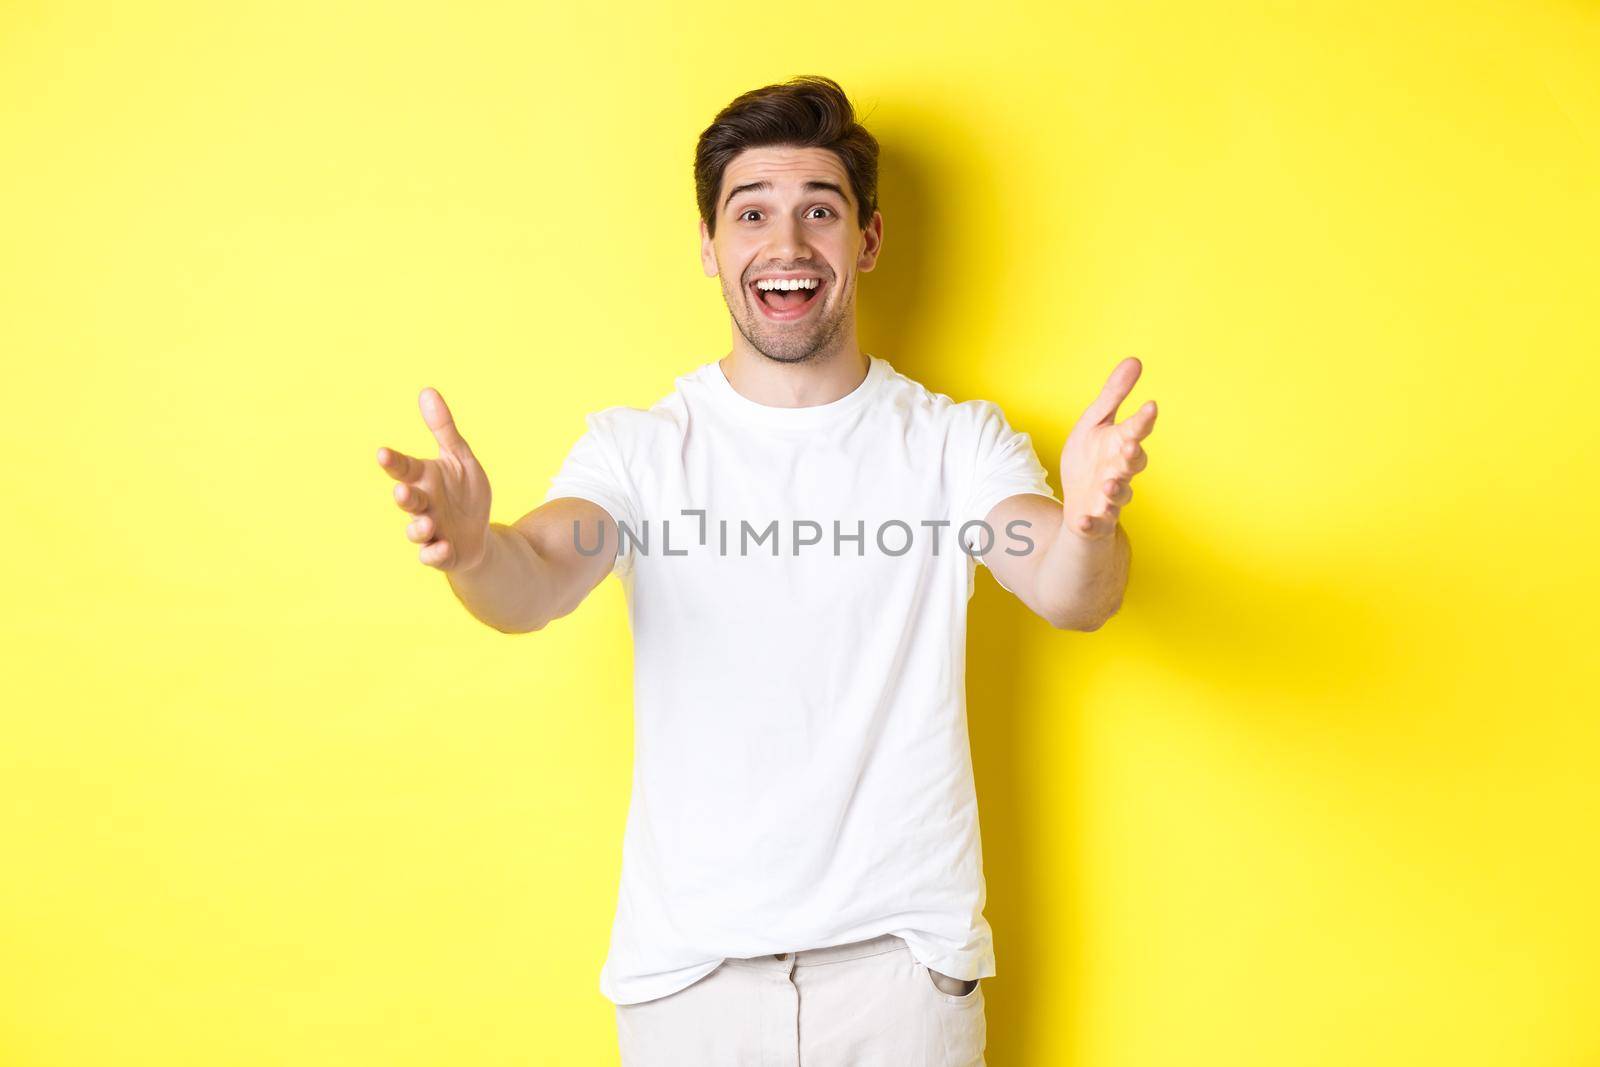 Excited handsome guy stretching hands forward, reaching for hug, receiving gift, standing over yellow background.